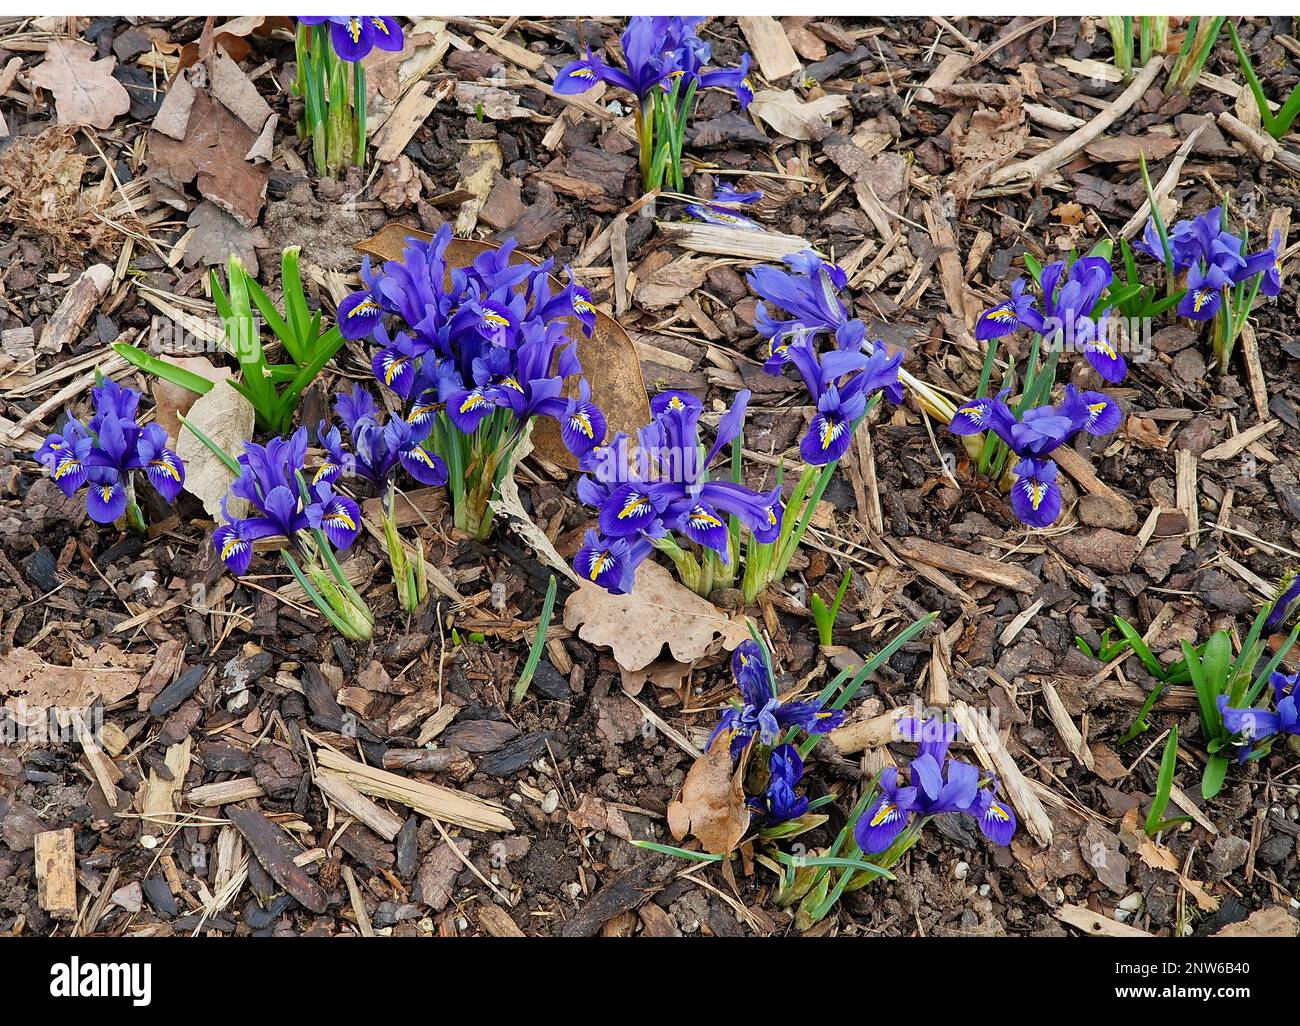 Closeup of the blue flowers of the garden bulb  Iris Harmony seen flowering in the garden border in winter. Stock Photo